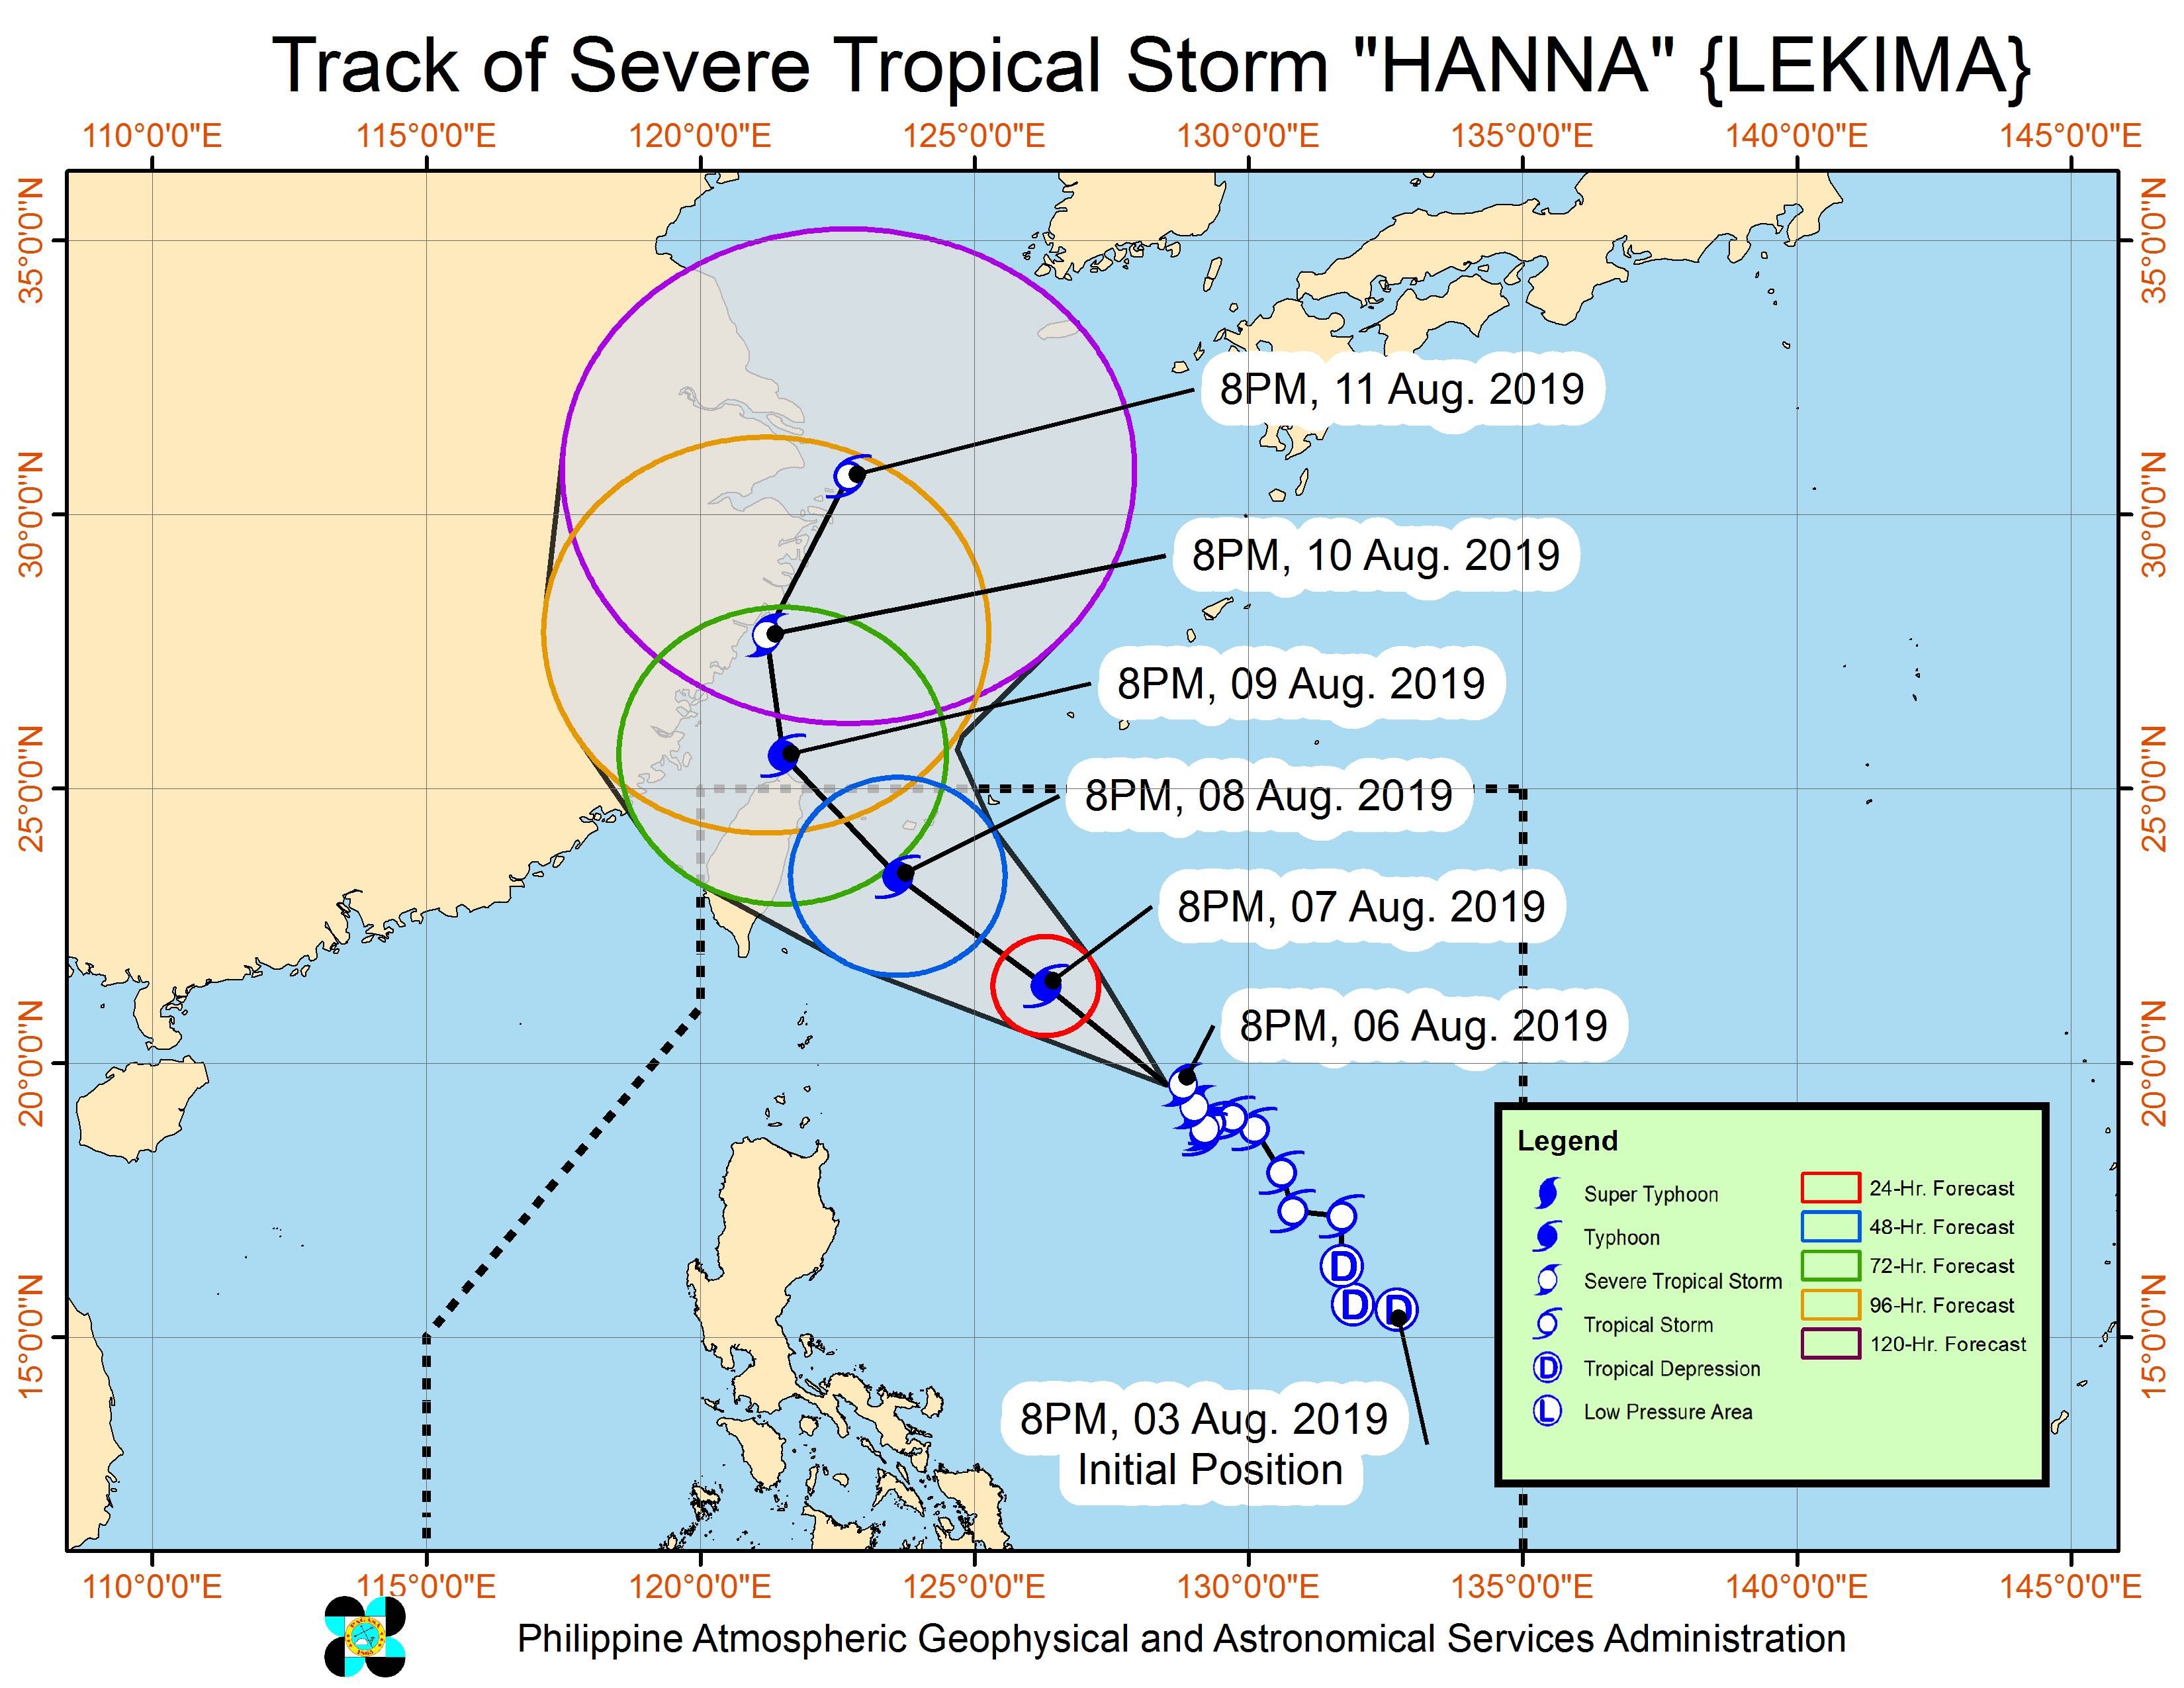 Forecast track of Severe Tropical Storm Hanna (Lekima) as of August 6, 2019, 11 pm. Image from PAGASA 